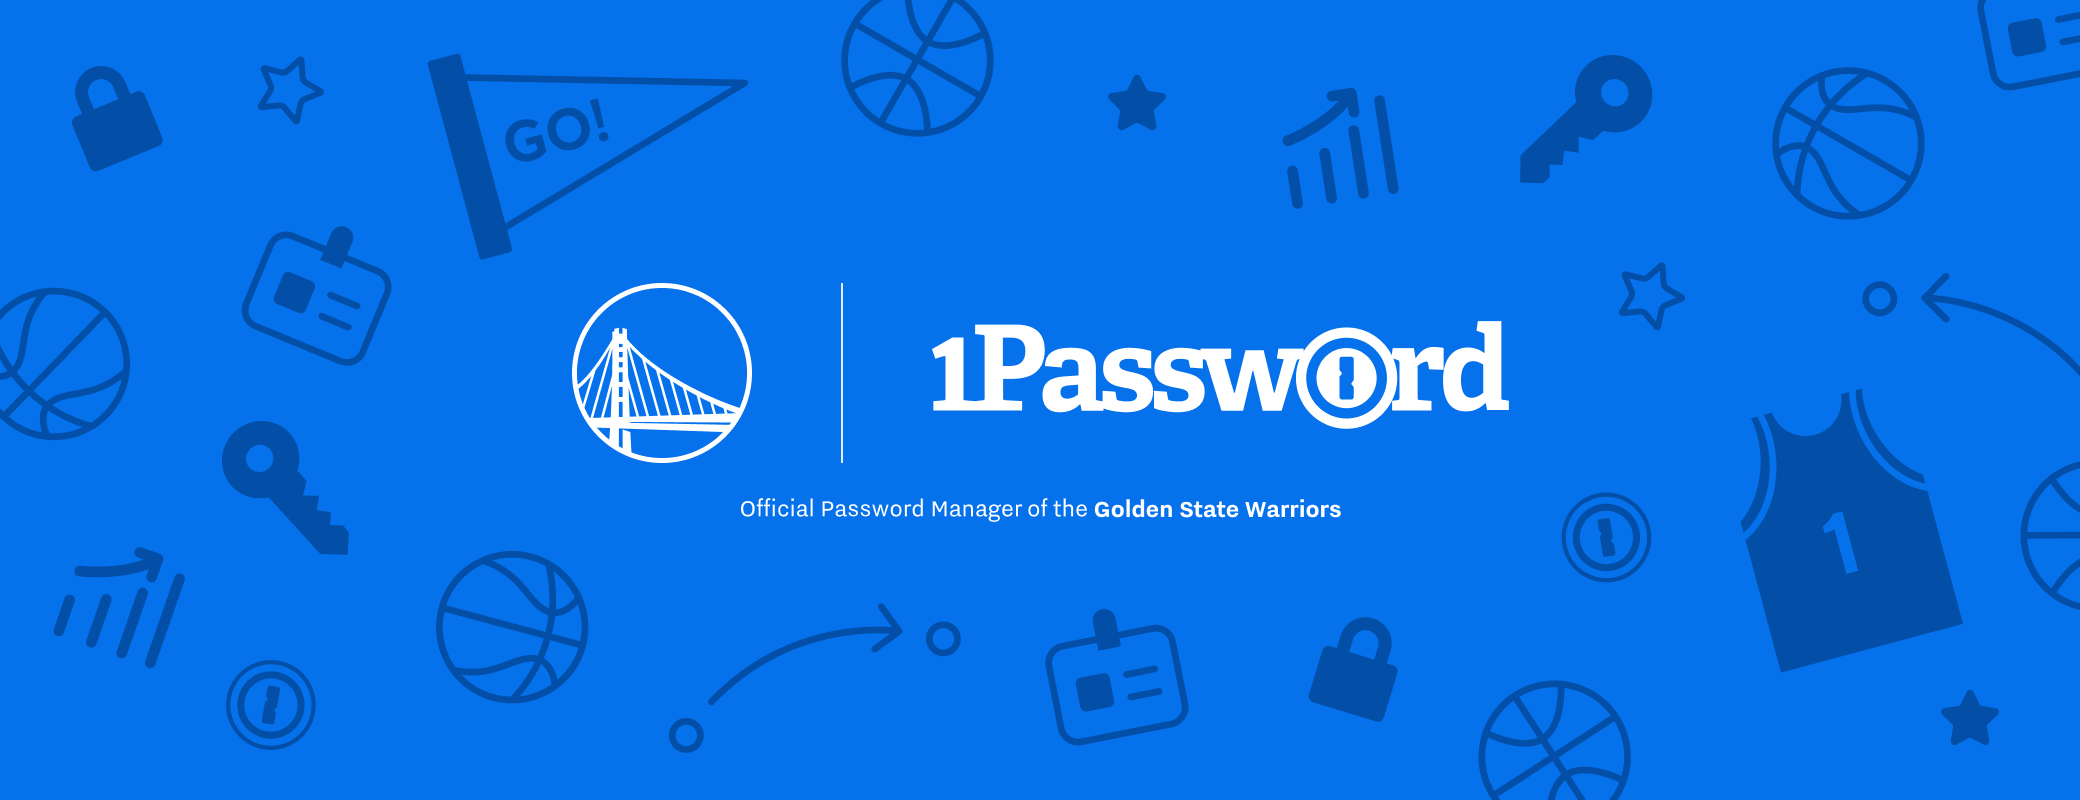 1Password is now the official password manager of the Golden State Warriors